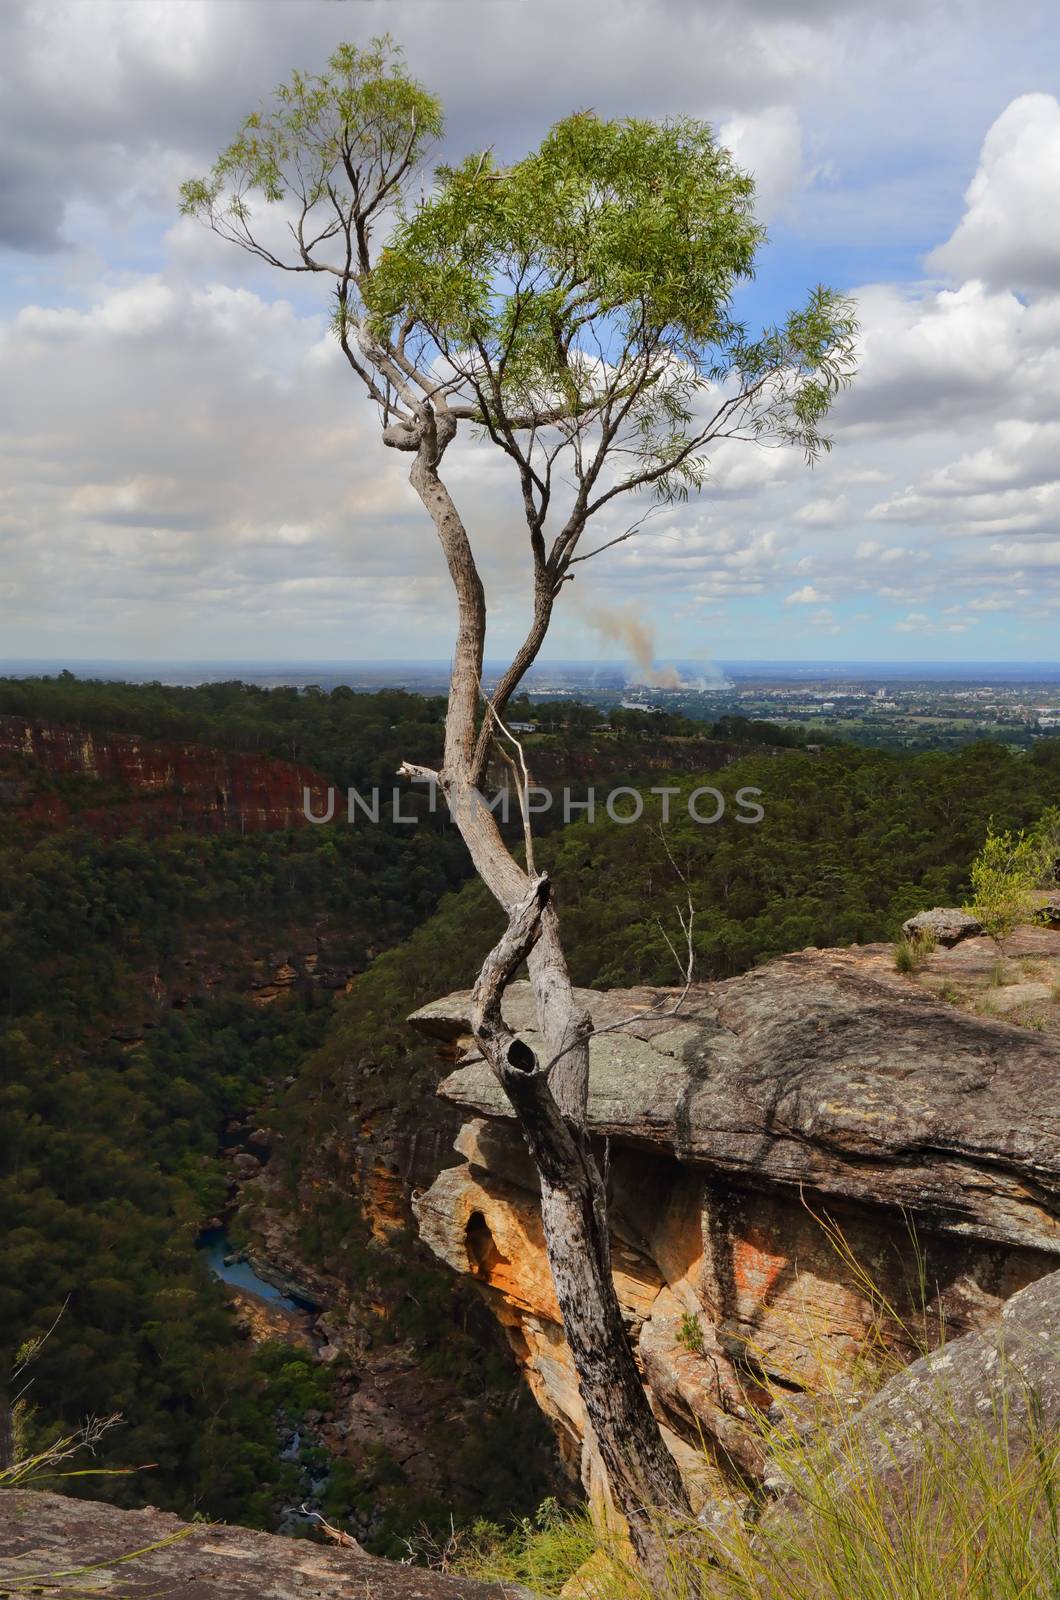 Views along Glenbrook Gorge with Glenbrook creek below.  Penrith Valley and greater Sydney beyond. Many bushwalks take you down into the gorge and along the creek beds until you reach the Nepean  River.